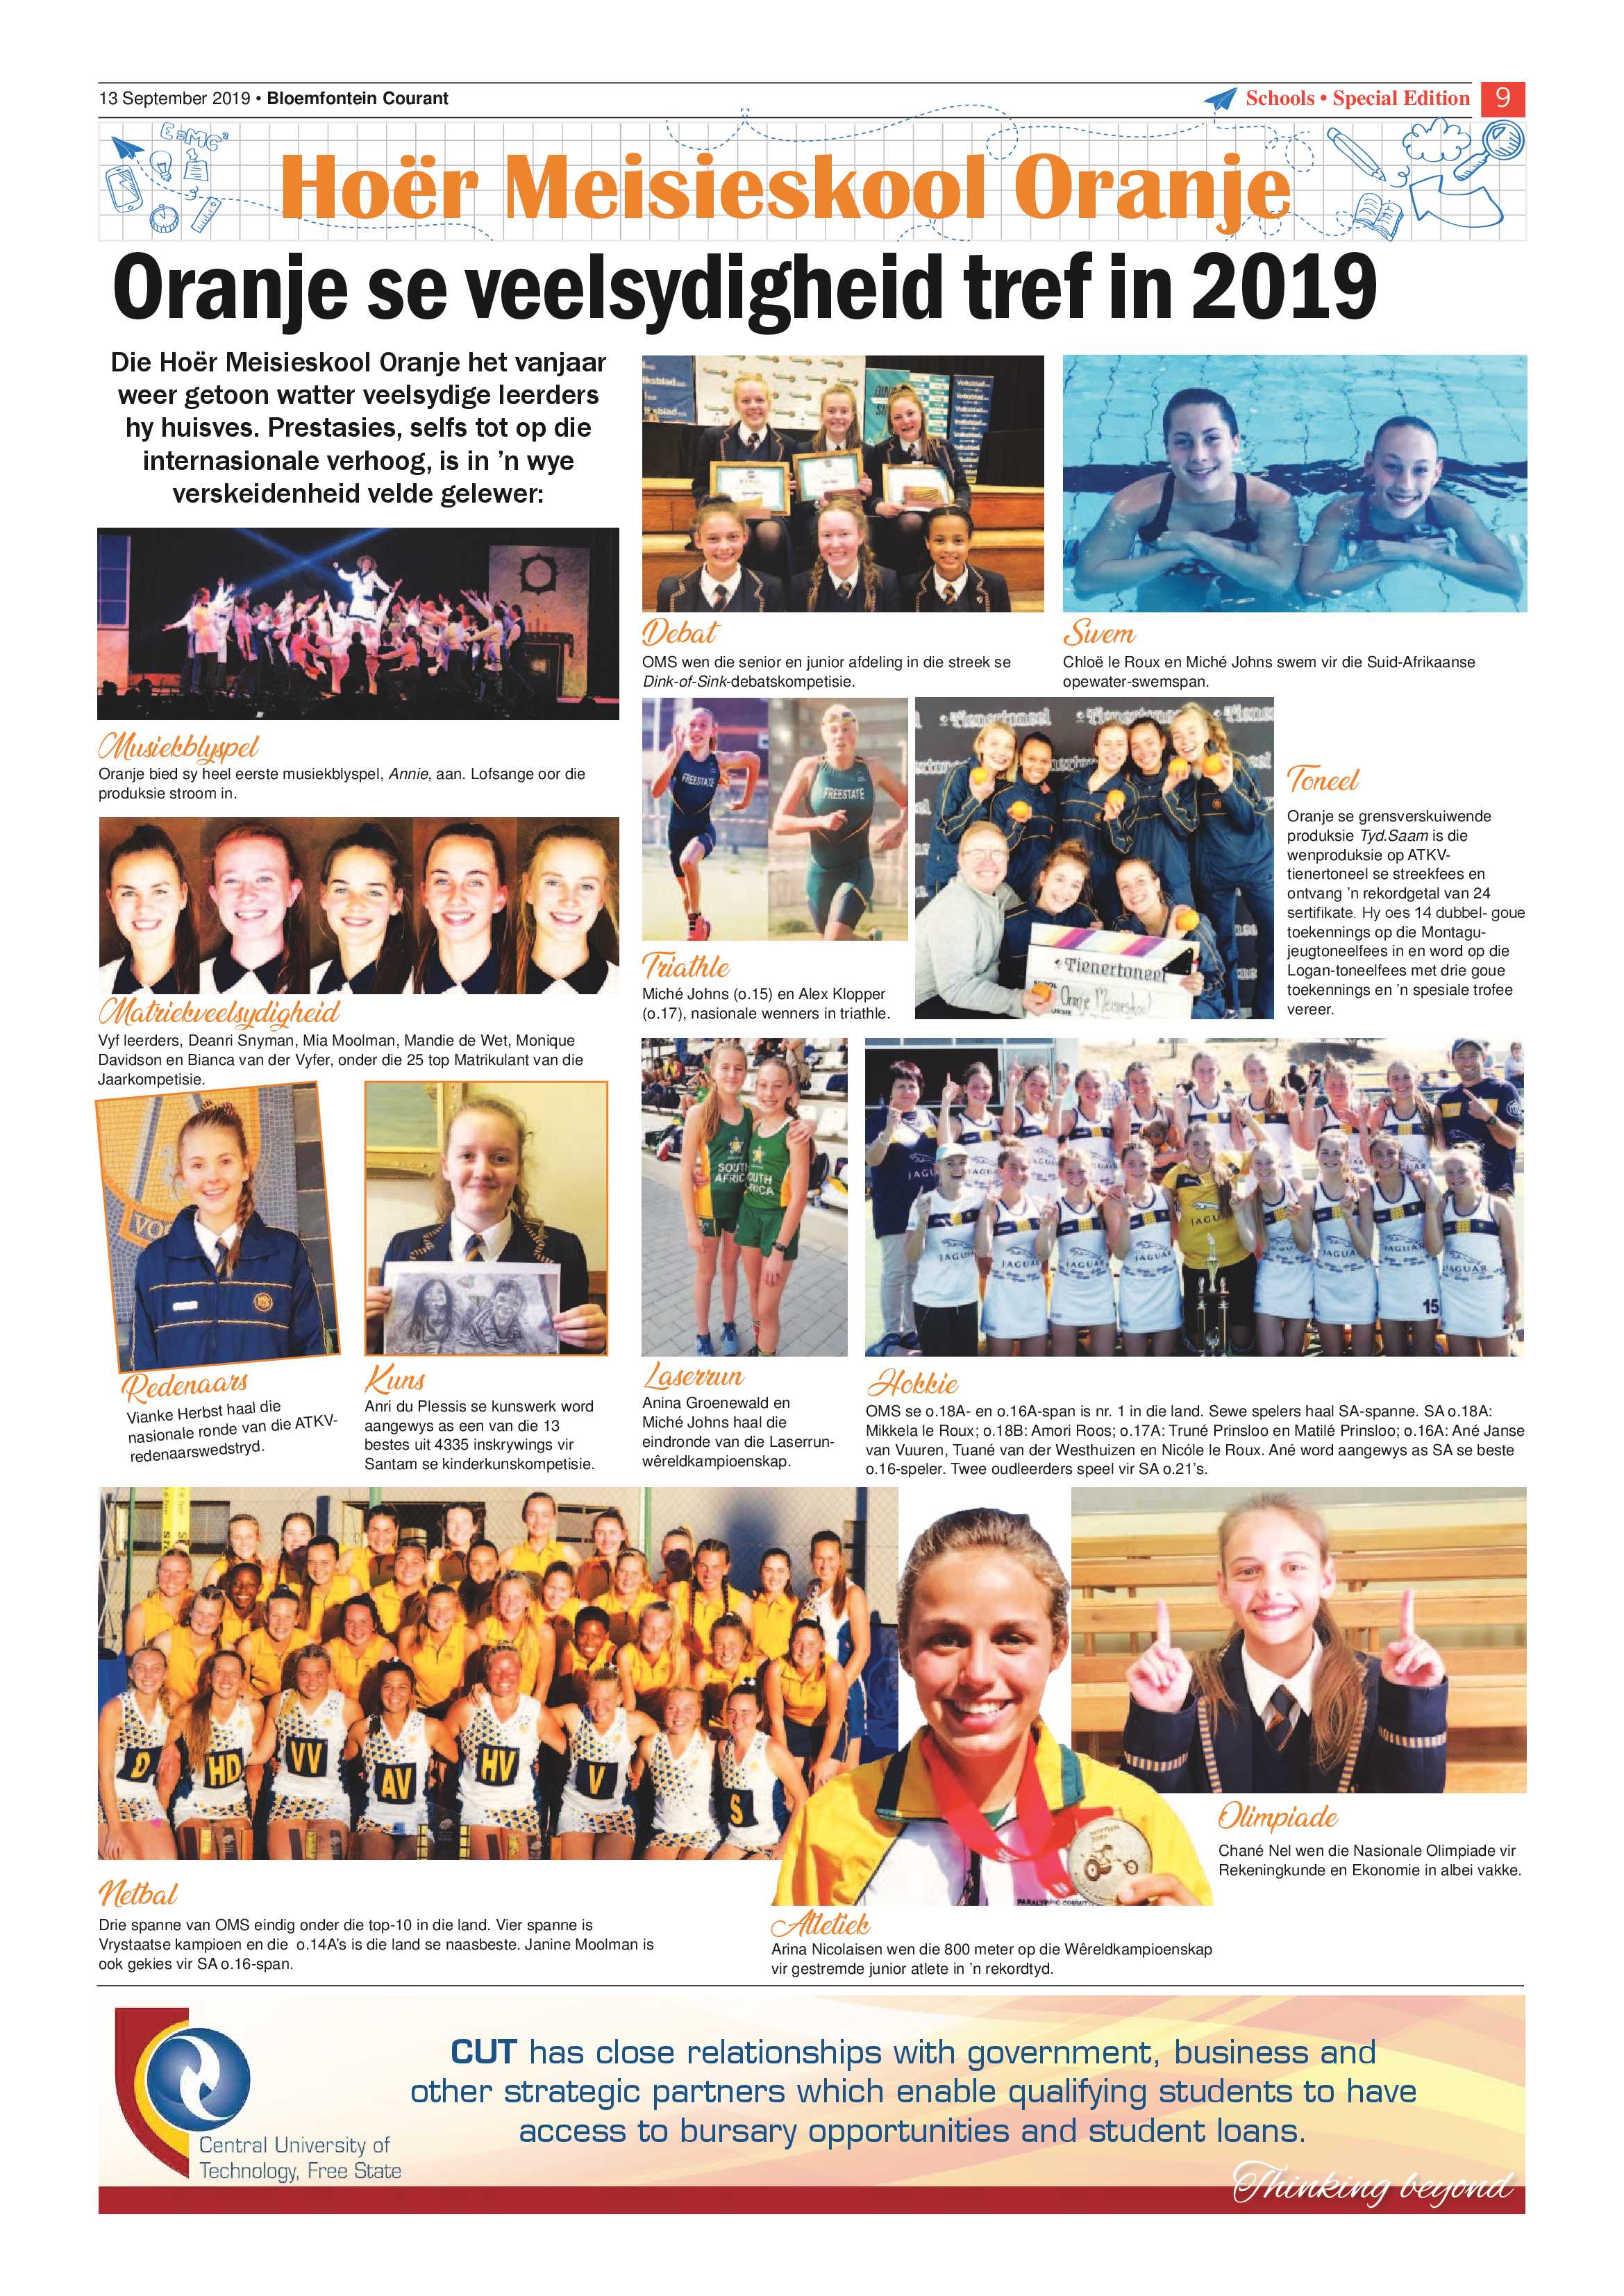 courant-13-june-2019-school-special-edition-epapers-page-9